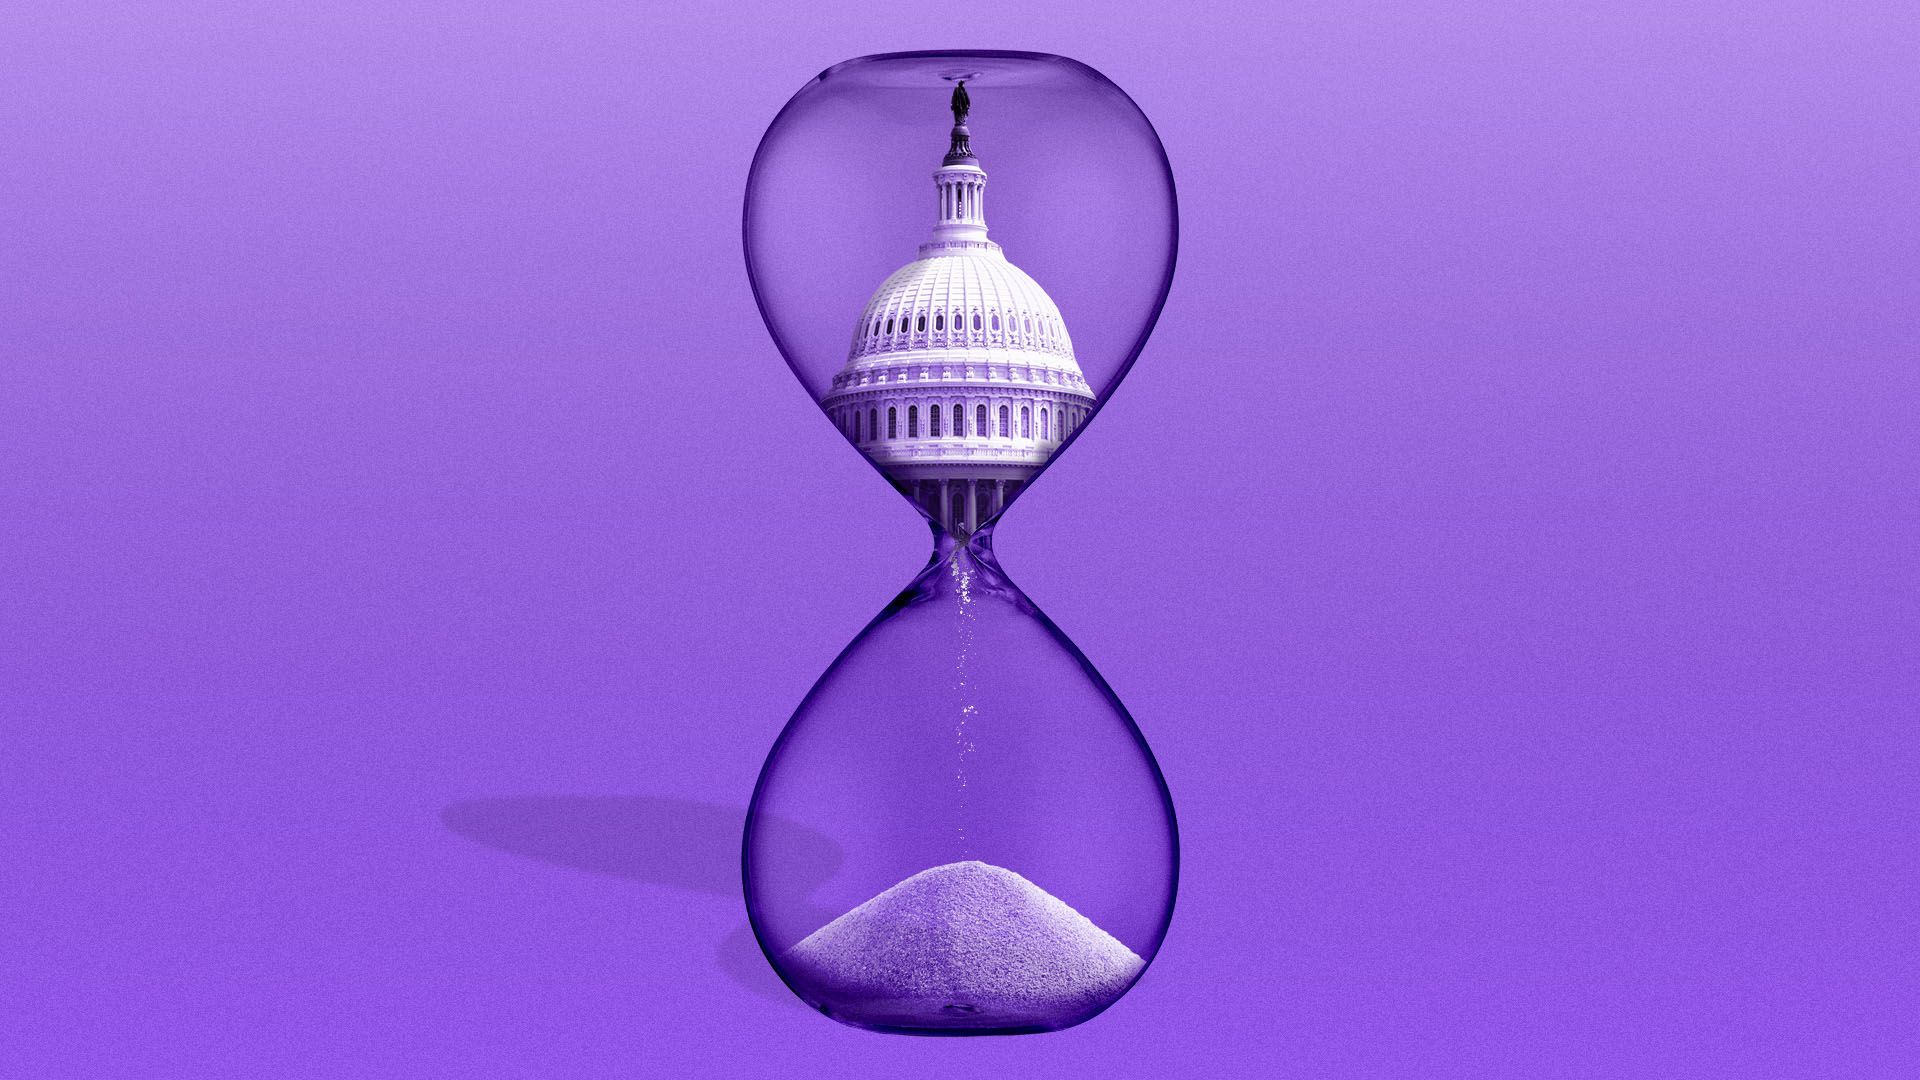 Illustration of the Congressional Dome disappearing in an hour glass